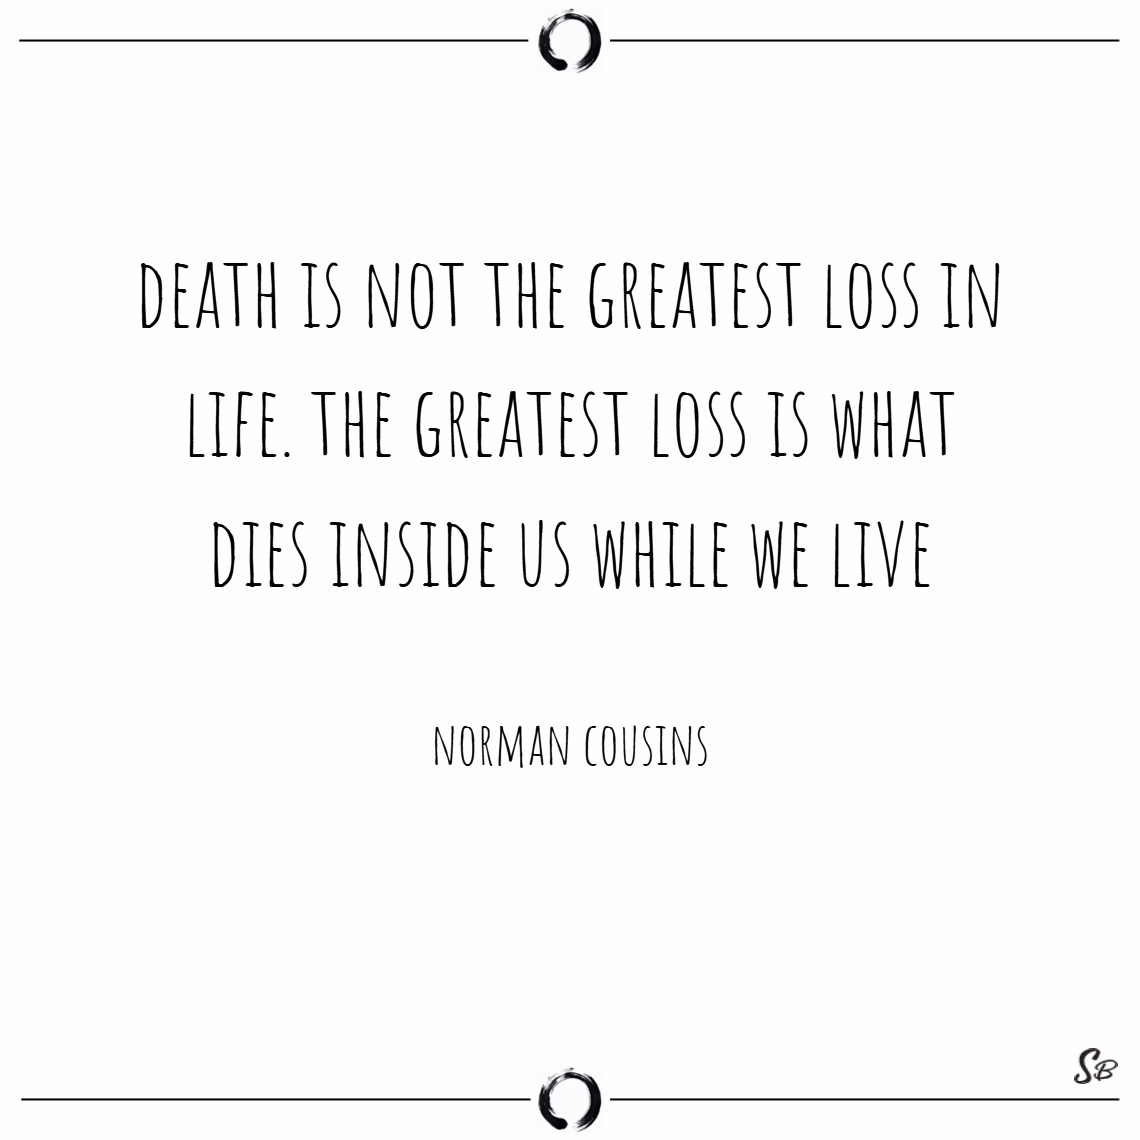 Death is not the greatest loss in life. the greatest loss is what dies inside us while we live. Norman Cousins